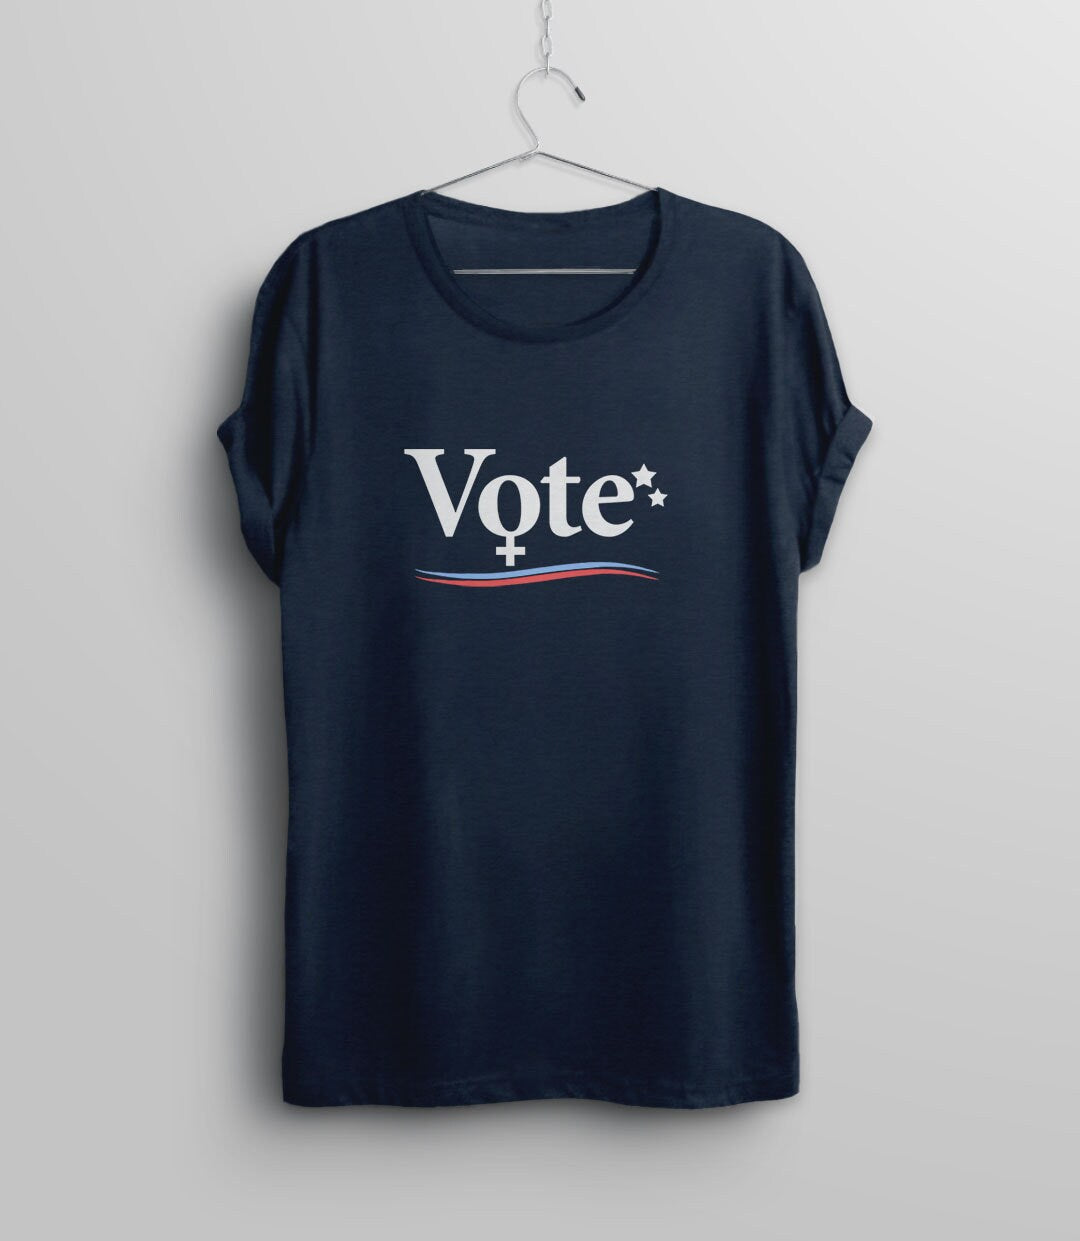 Vote for Women Shirt, Navy Blue Unisex XS by BootsTees